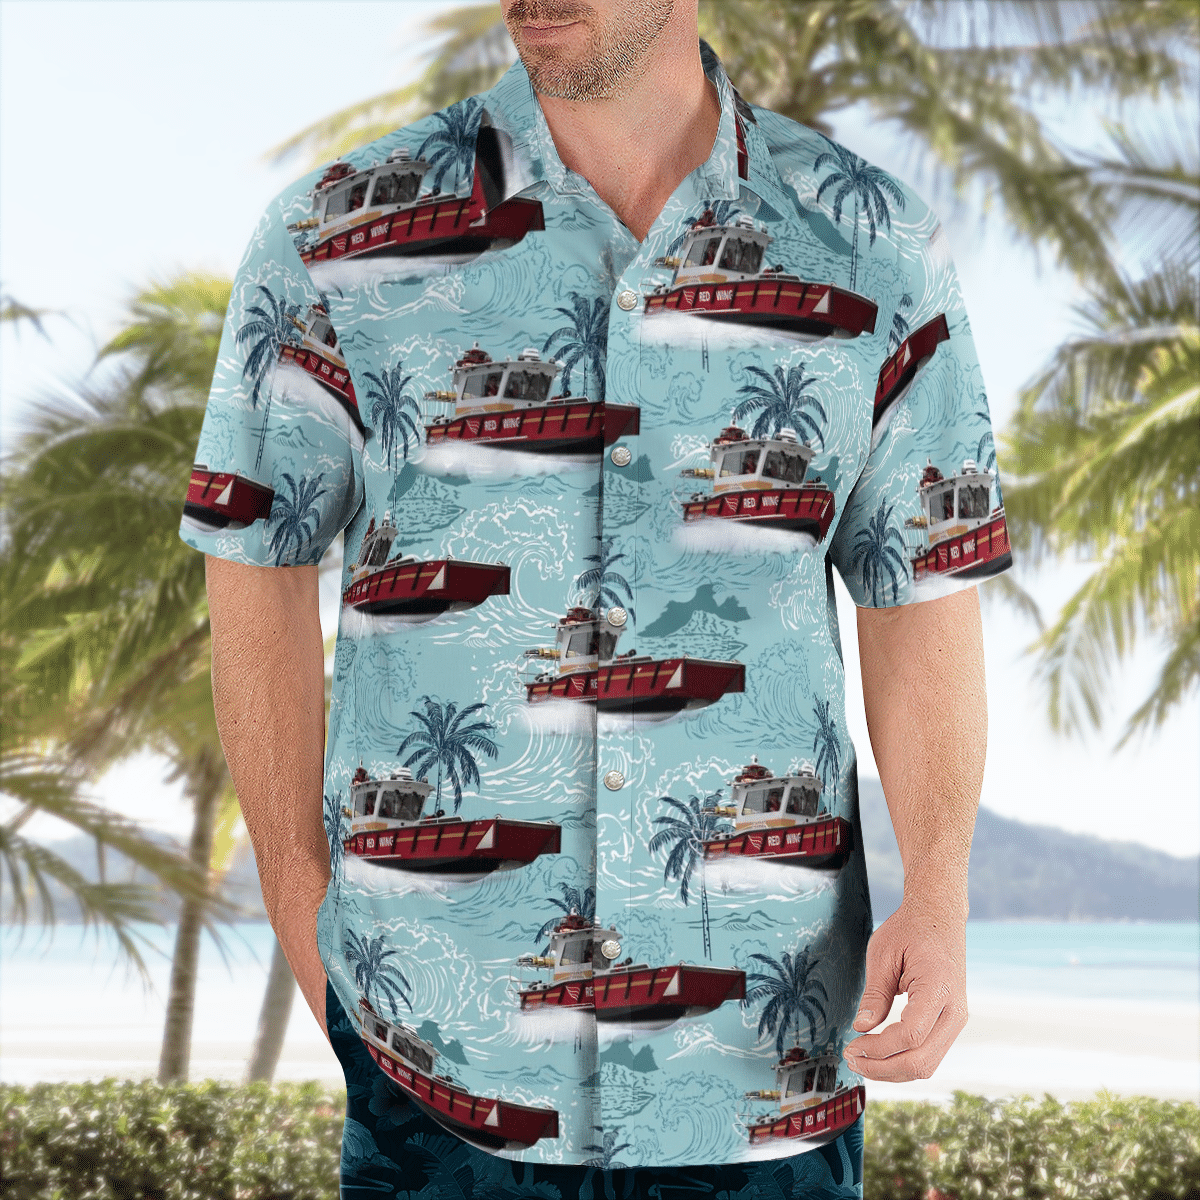 There are several styles of beach and Hawaiian shorts and tops to choose from 174